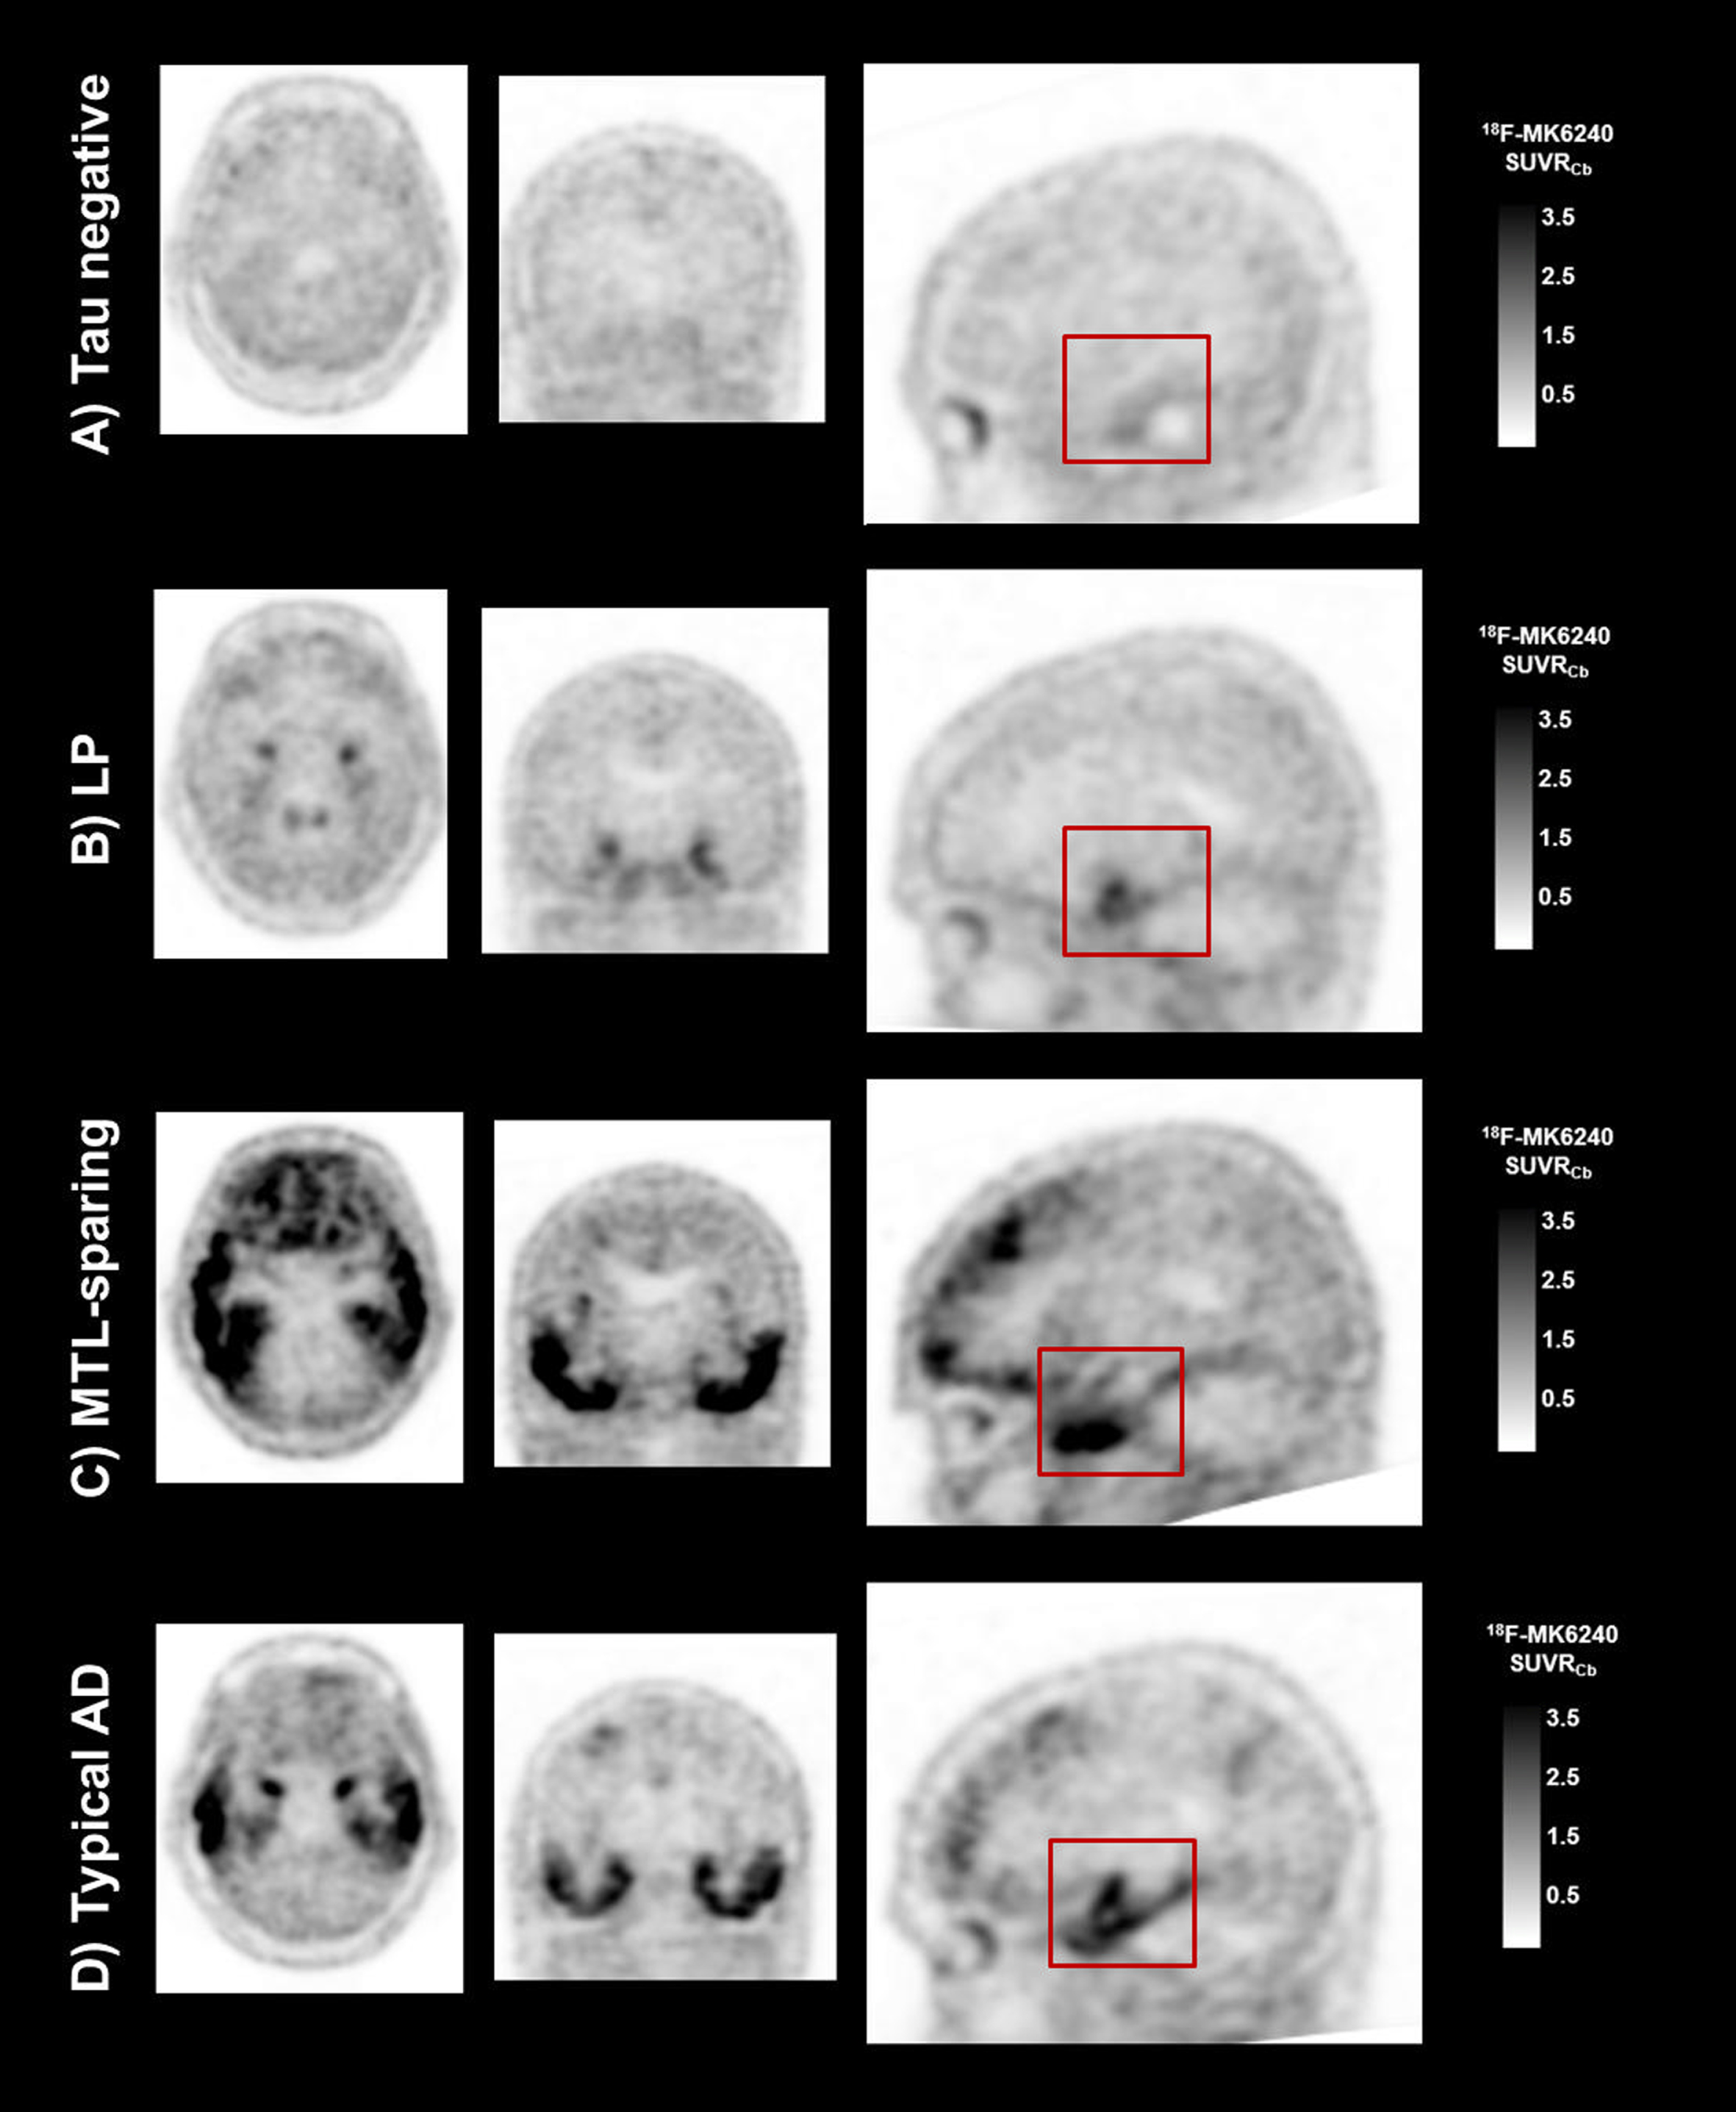 Examples of the four tau 18F-MK6240 PET visual classification categories. Representative tau 18F-MK6240 PET SUVR images for participants classified as A) tau negative; B) LP predominant; C) MTL-sparing; and D) Typical. The red boxes highlight 18F-MK6240 tracer retention in a “hook”-like distribution, observed in the LP and Typical cases, and the relative absence of 18F-MK6240 tracer retention in these structures in the MTL-sparing case, where instead tracer retention is observed in the inferior temporal lobe.